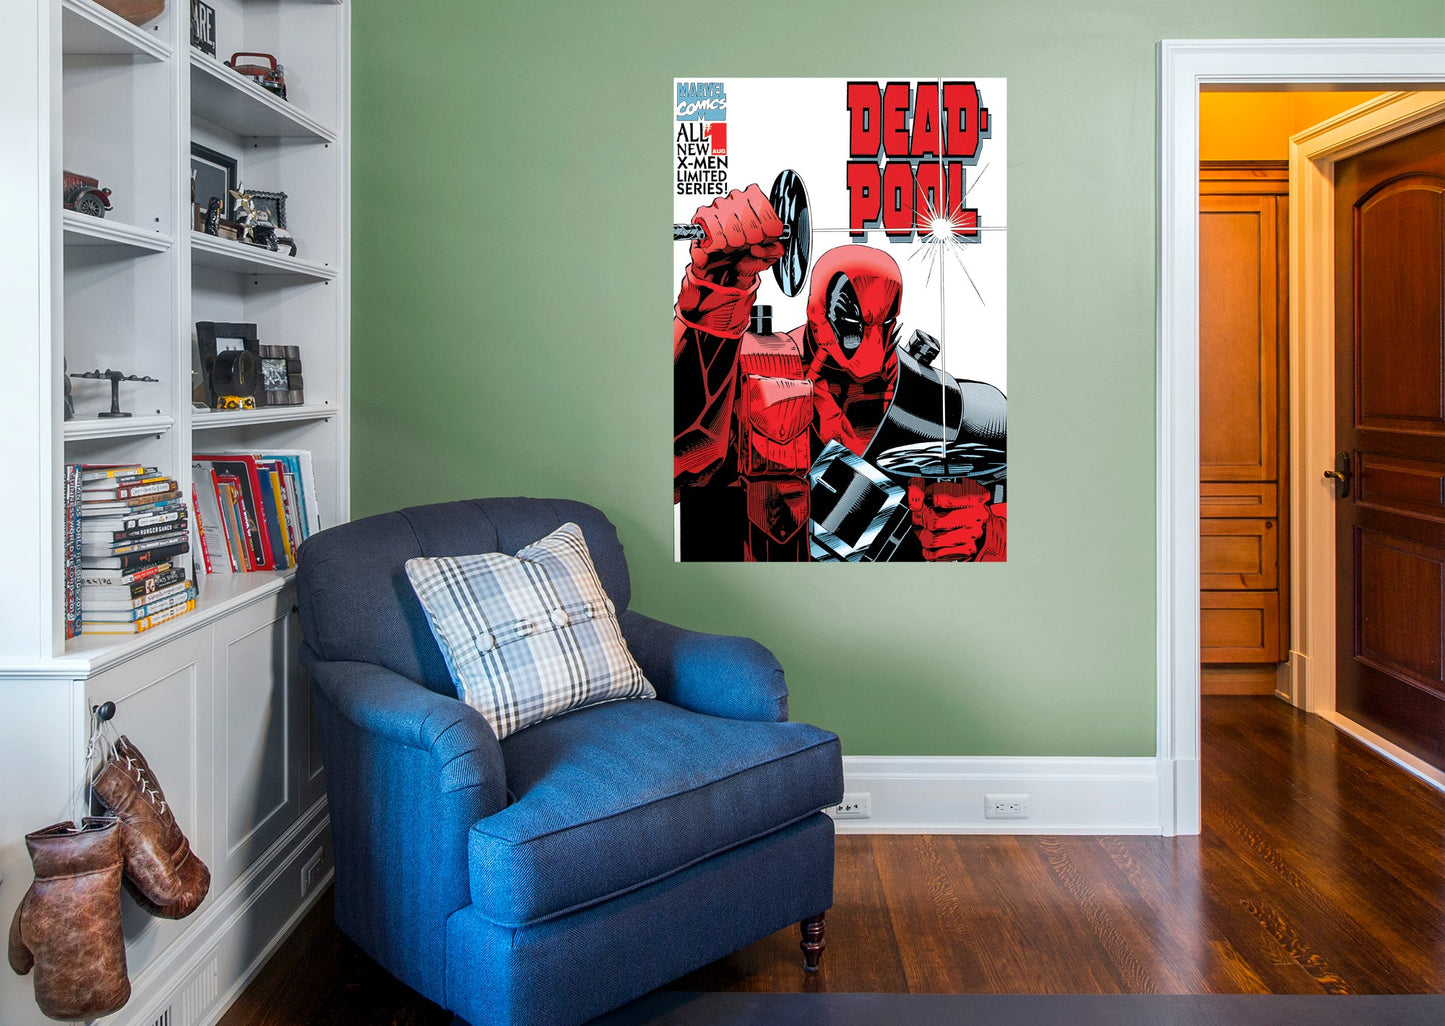 Deadpool:  Nerdy 30 Deadpool #1 Comic Cover Mural        - Officially Licensed Marvel Removable Wall   Adhesive Decal